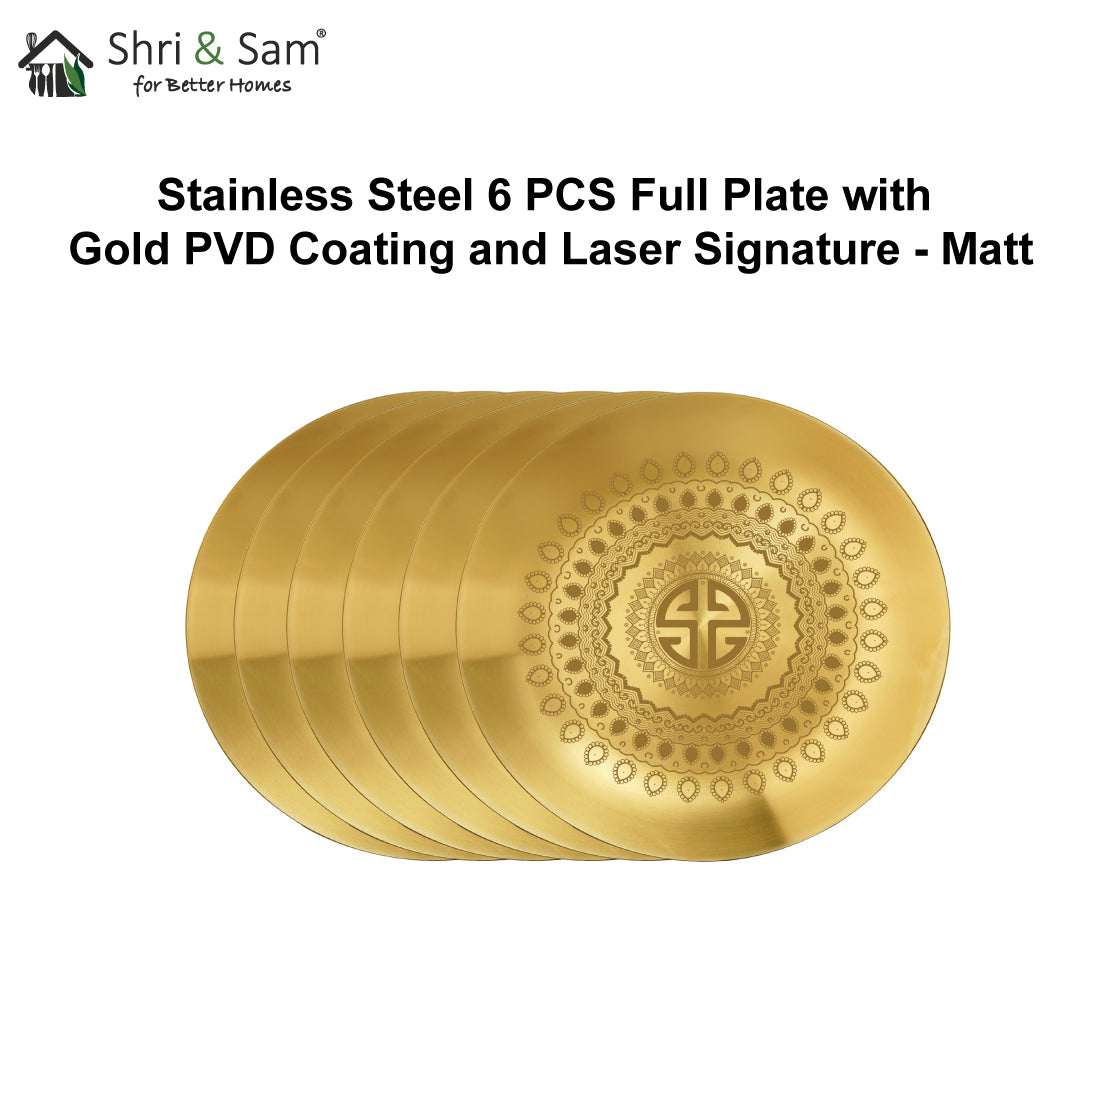 Stainless Steel 6 PCS Full Plate with Gold PVD Coating and Laser Signature - Matt